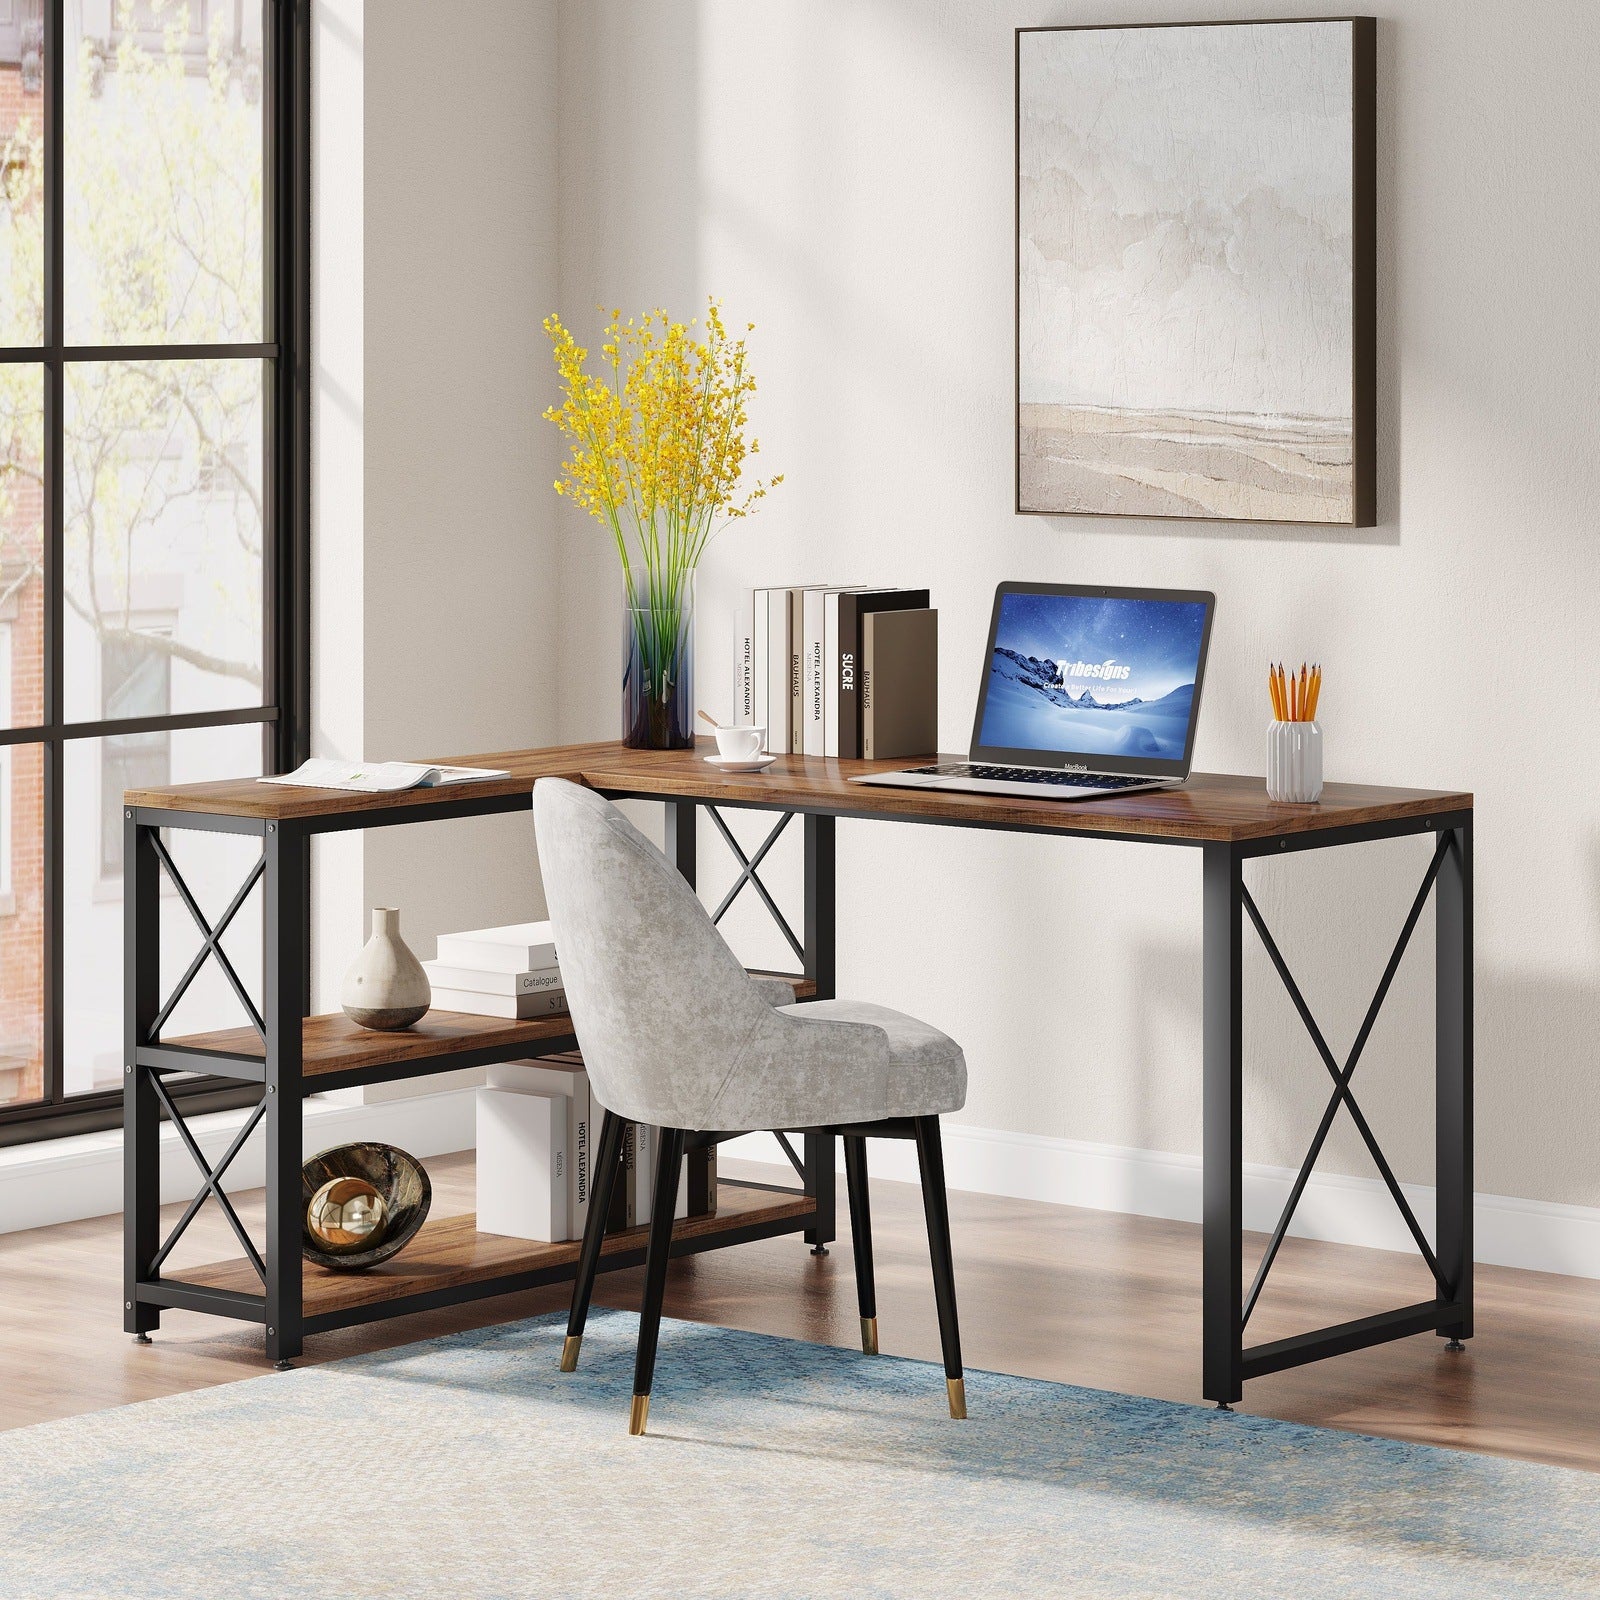 VASAGLE Industrial L-Shaped Computer Desk, Corner Desk, Office Study Workstation with Shelves for Home Office, Space-Saving, Easy to Assemble, Rustic